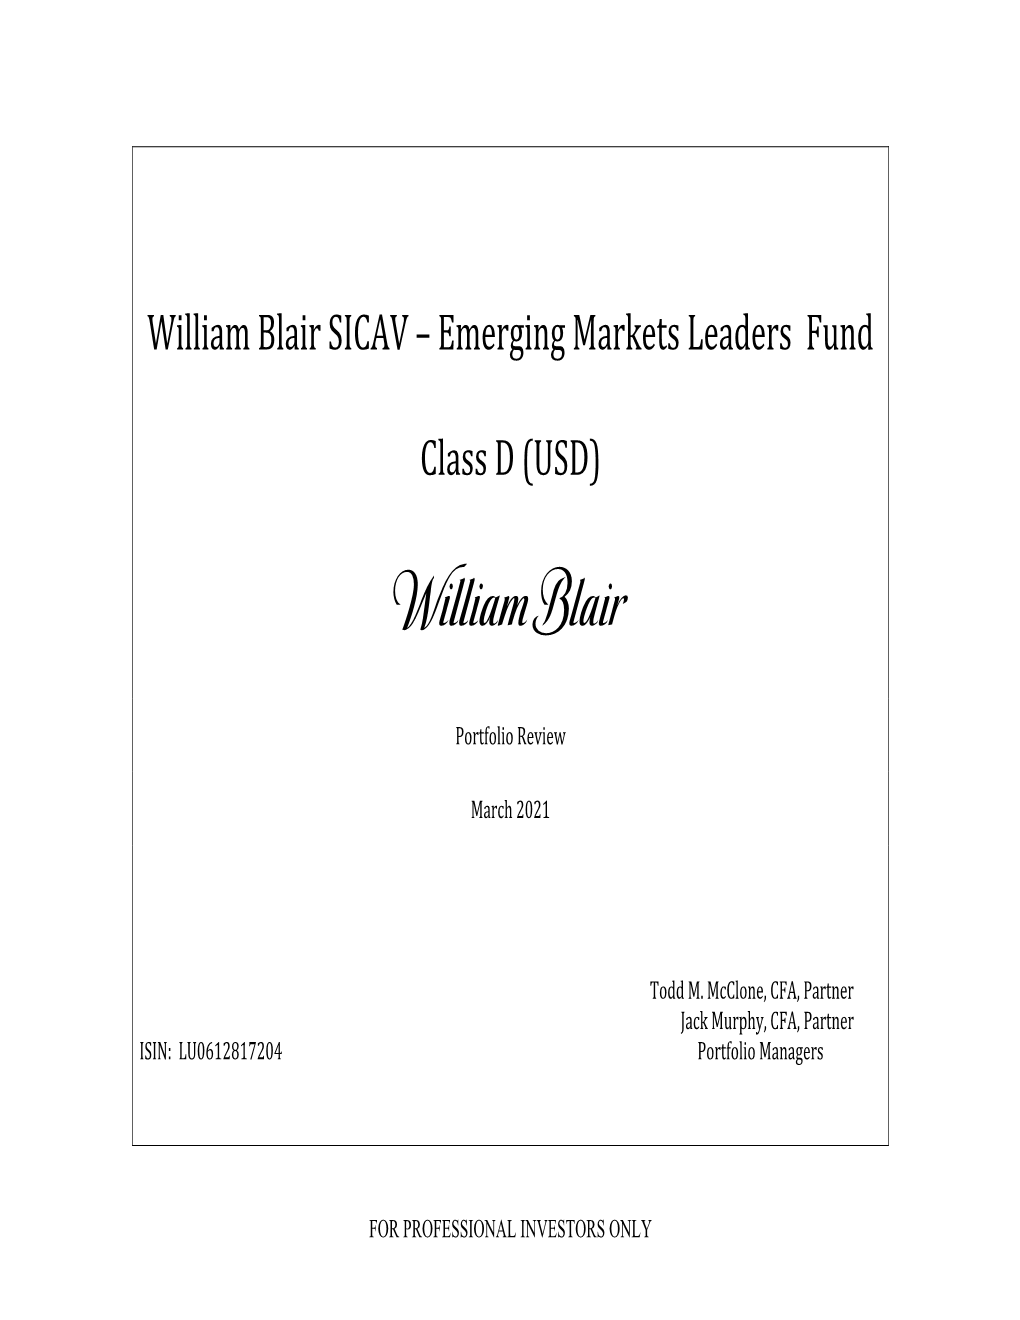 Emerging Markets Leaders Fund Class D (USD)